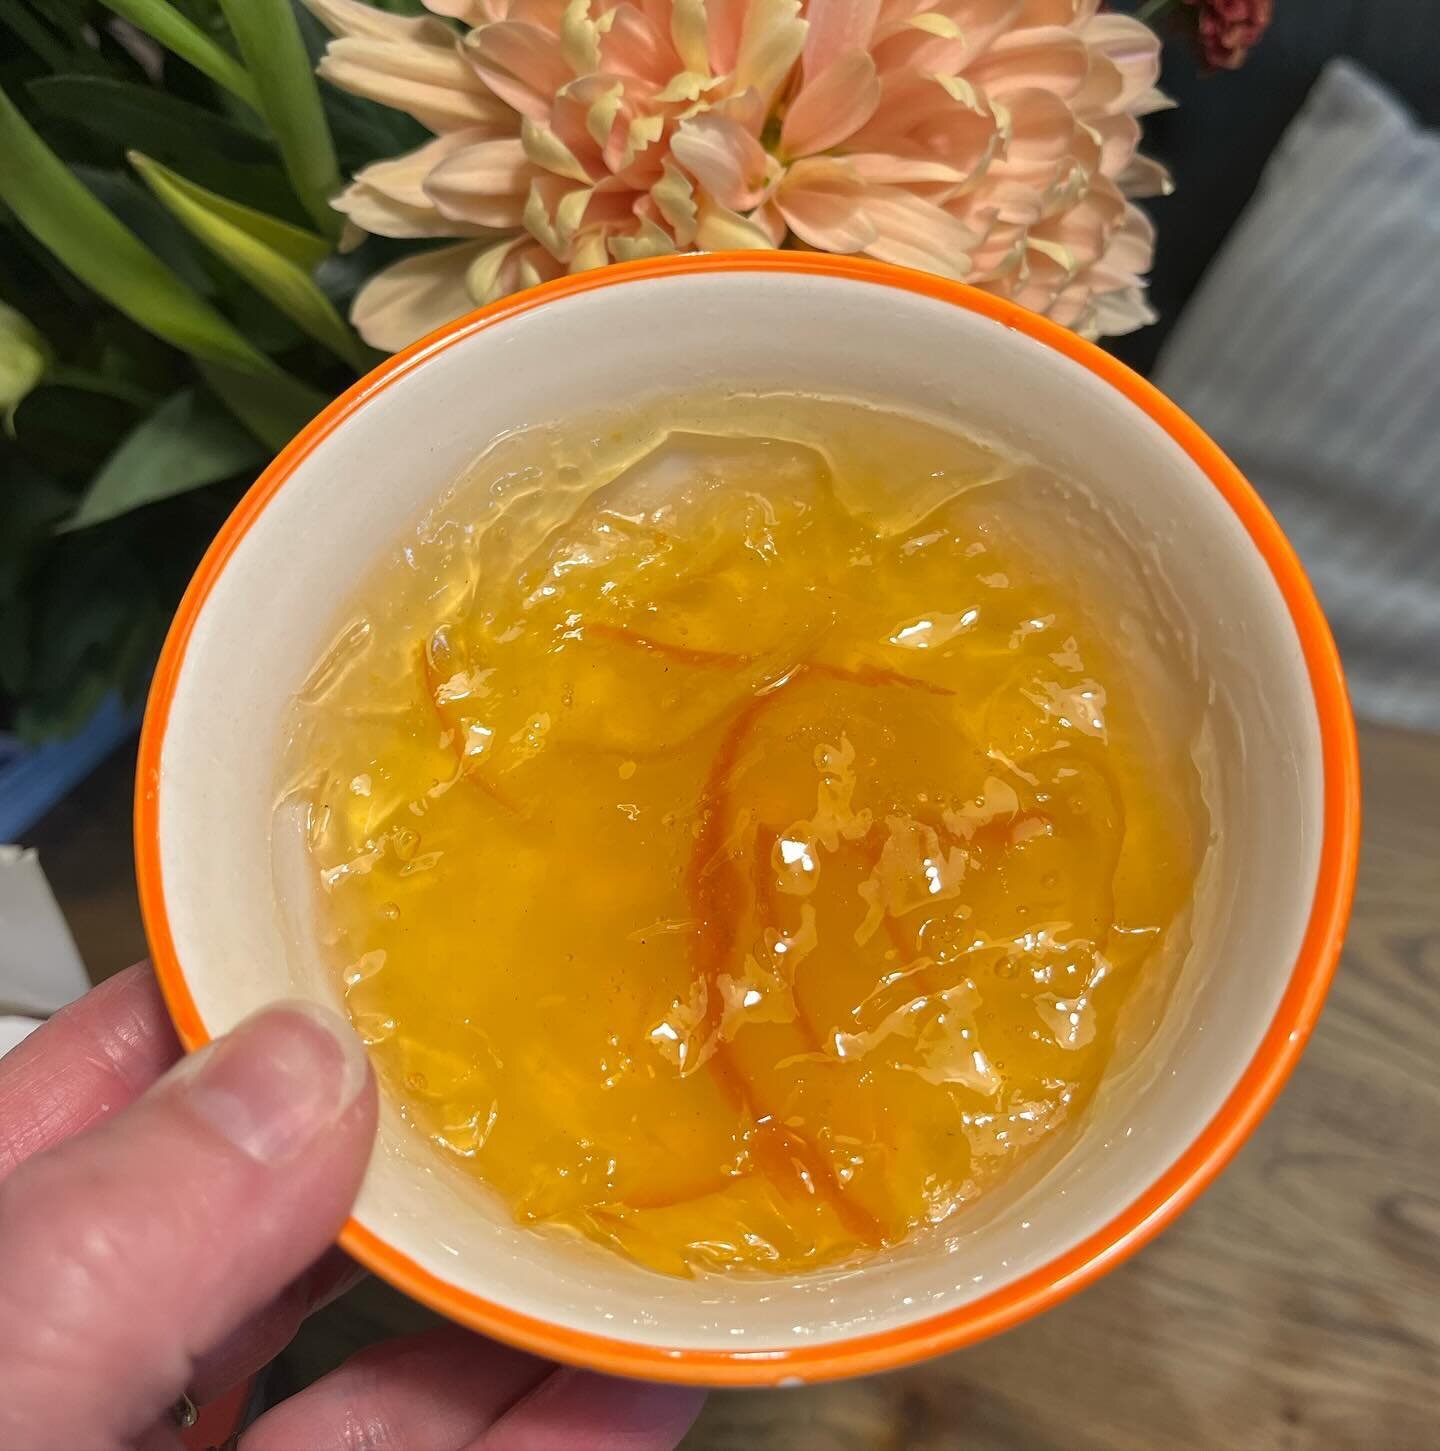 Cold and dull days deserve some brightness #homemade #sevilleorangemarmalade #sevilleoranges #dundeemarmalade #marmalade #homecooking #nordicstyle #nordicliving